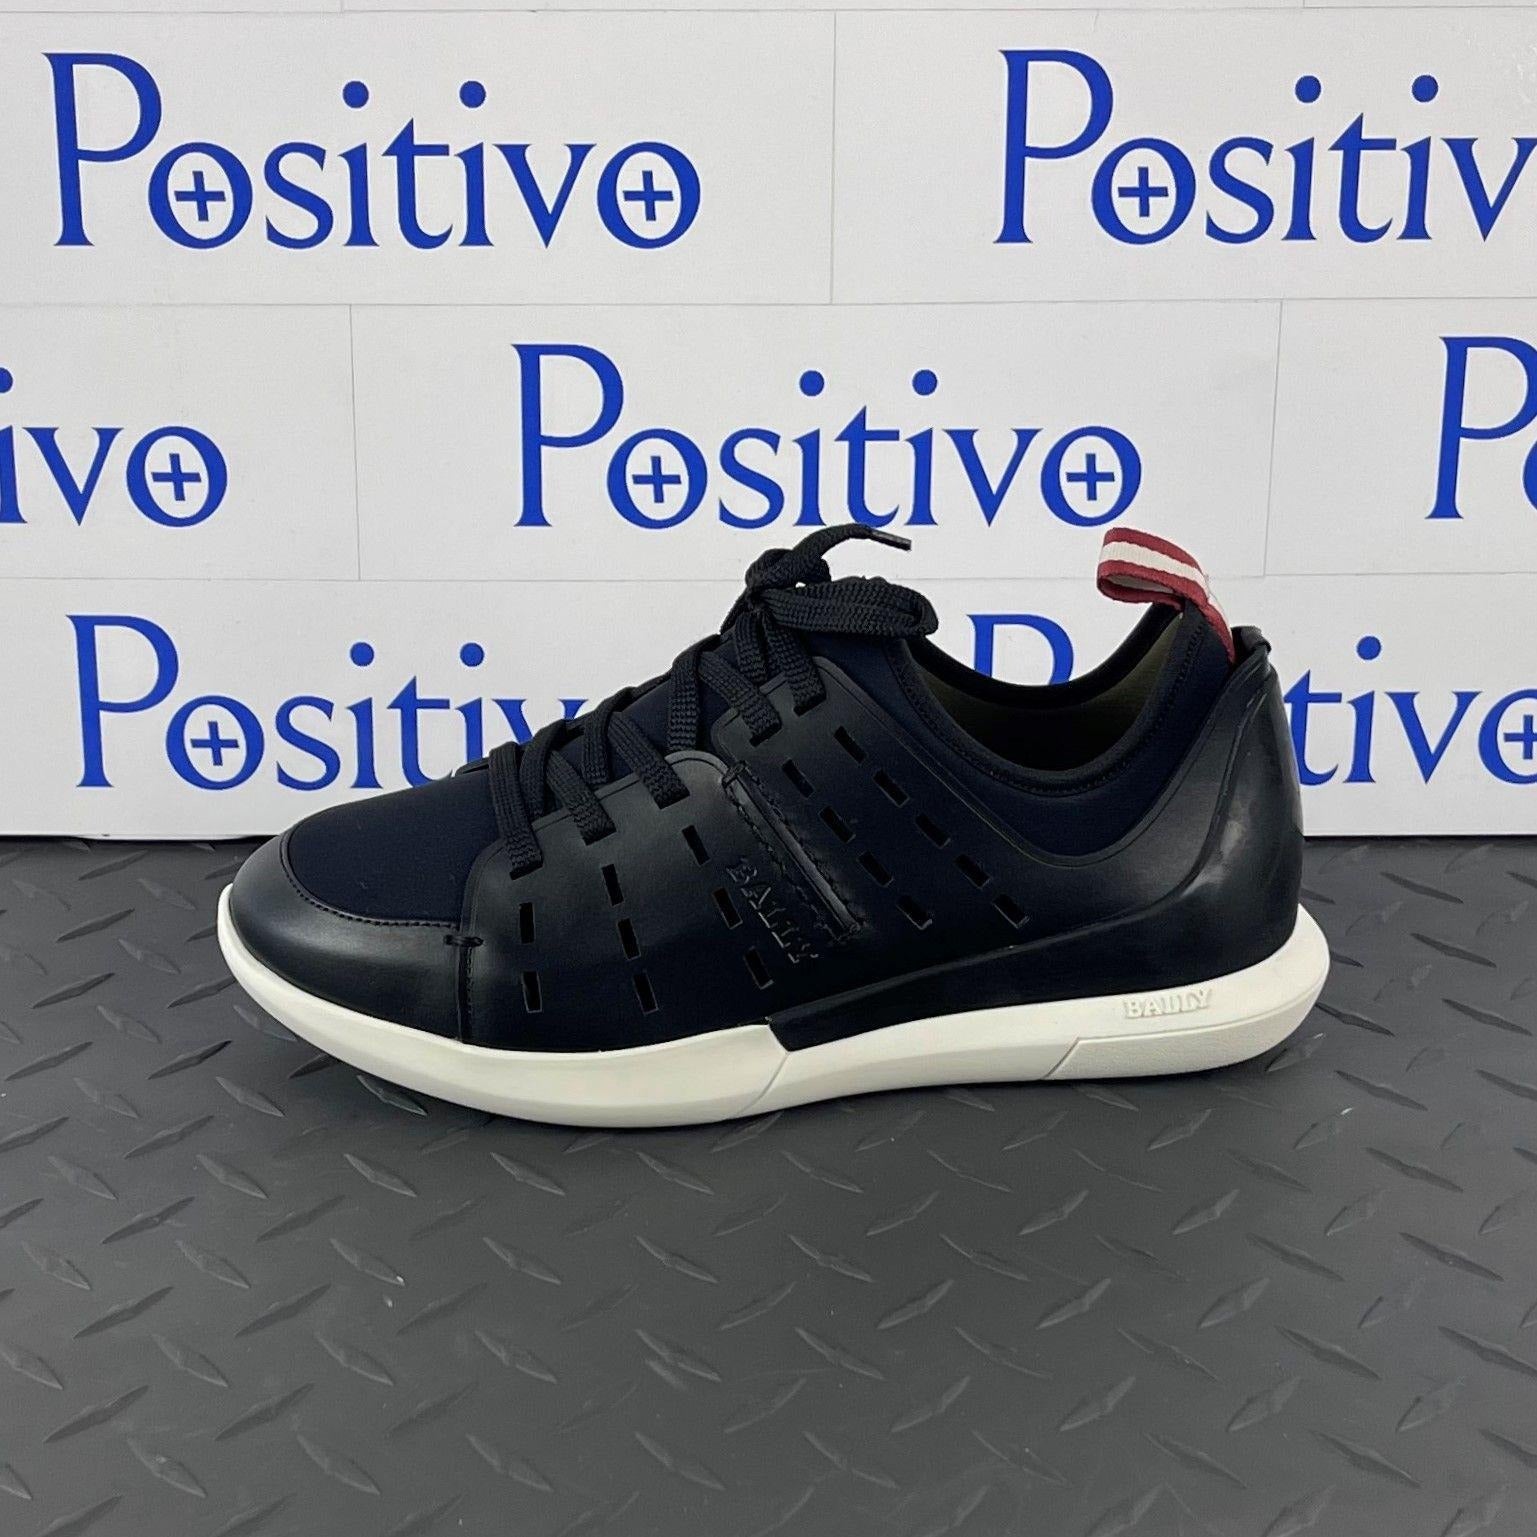 Bally Avary Black Leather Sneakers | Positivo Clothing